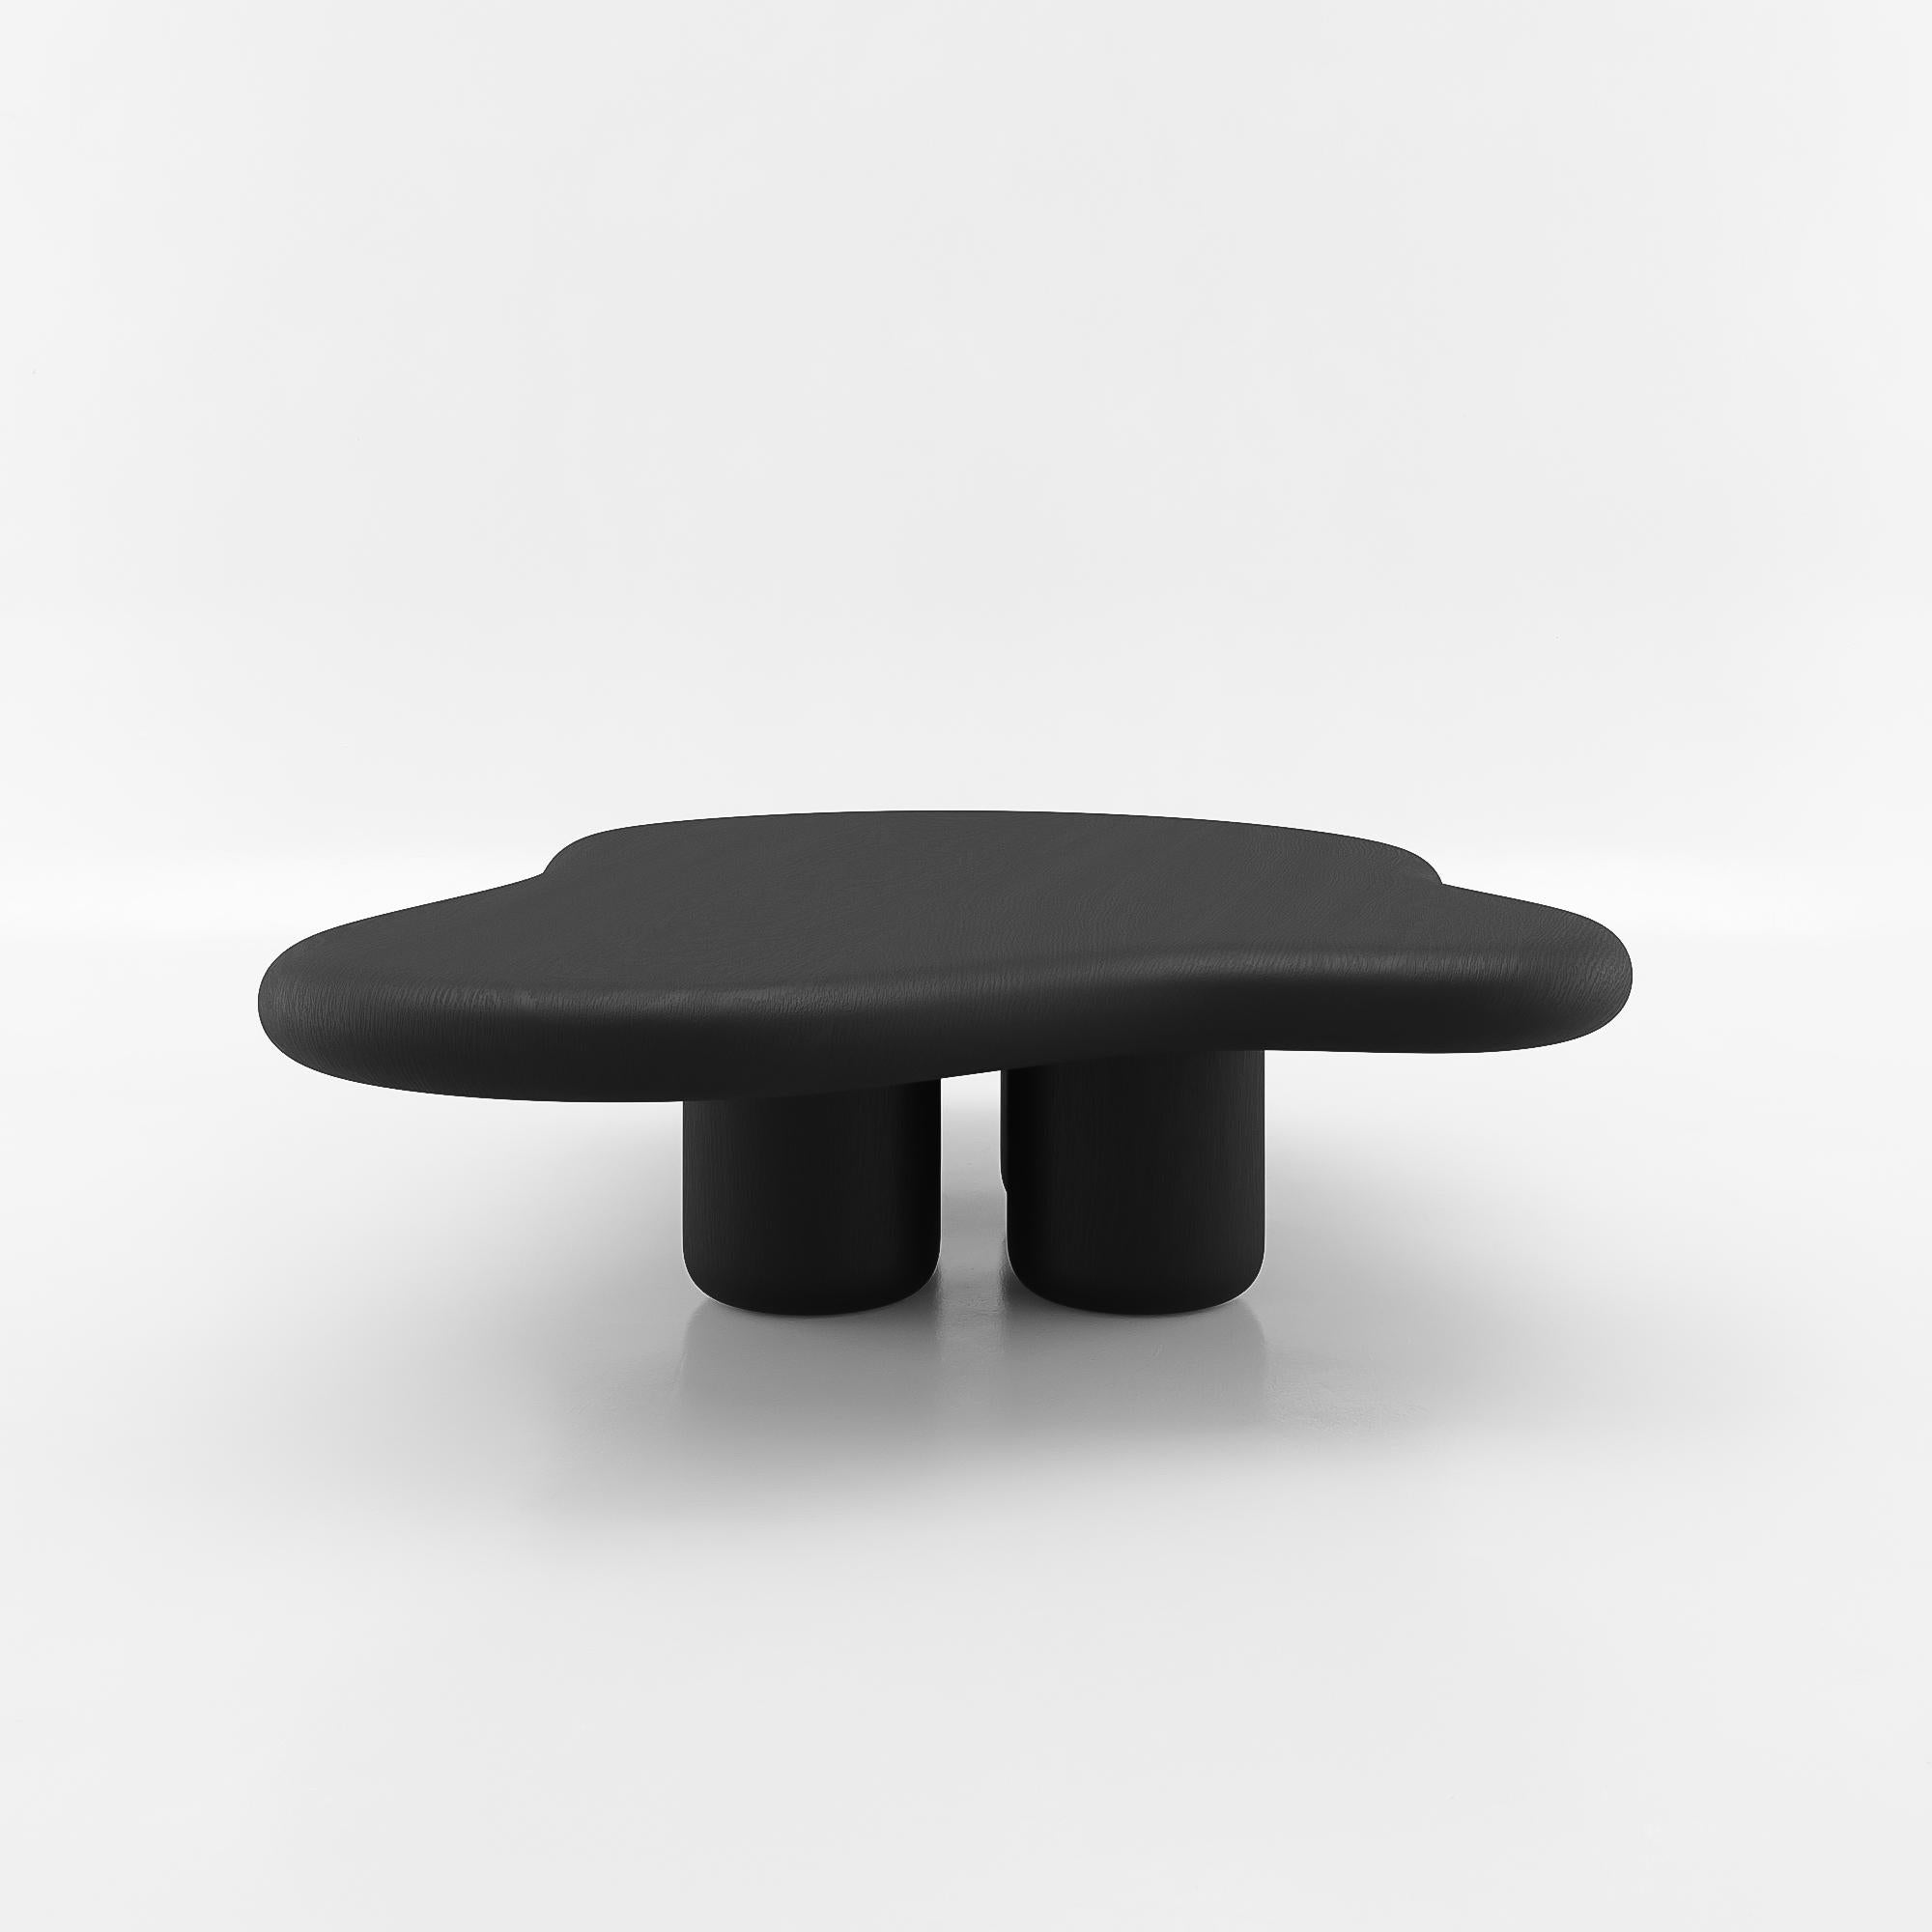 Klaksa Coffee table by Vladimir Naumov
Dimensions: H 30 x W 123 x L 89 cm
Materials: Black Oak, Natural Oak

Vladimir Naumov is a professional architect, designer and artist.

While designing the furniture he tries to reach the perfect bled of forms